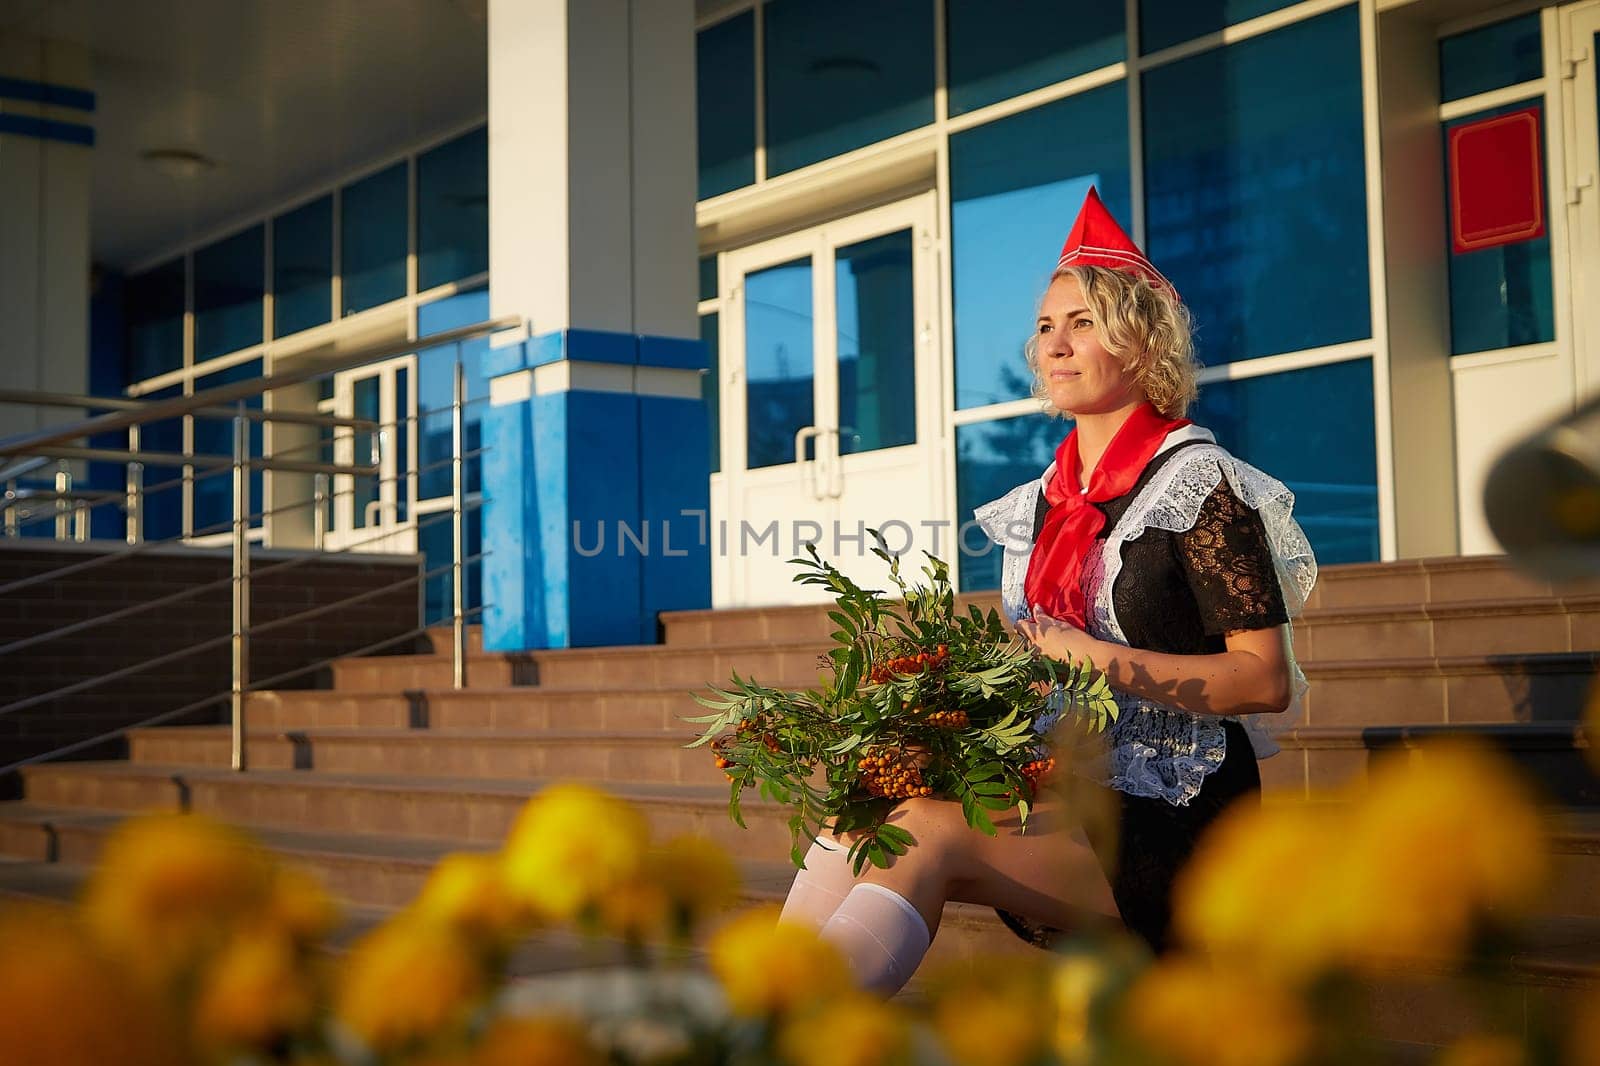 A Girl in black school uniform, white apron and red tie on steps of school with bouquet of flowers. Nostalgia photo shoot of teenager of female pioneer from USSR costume for September 1 or graduation